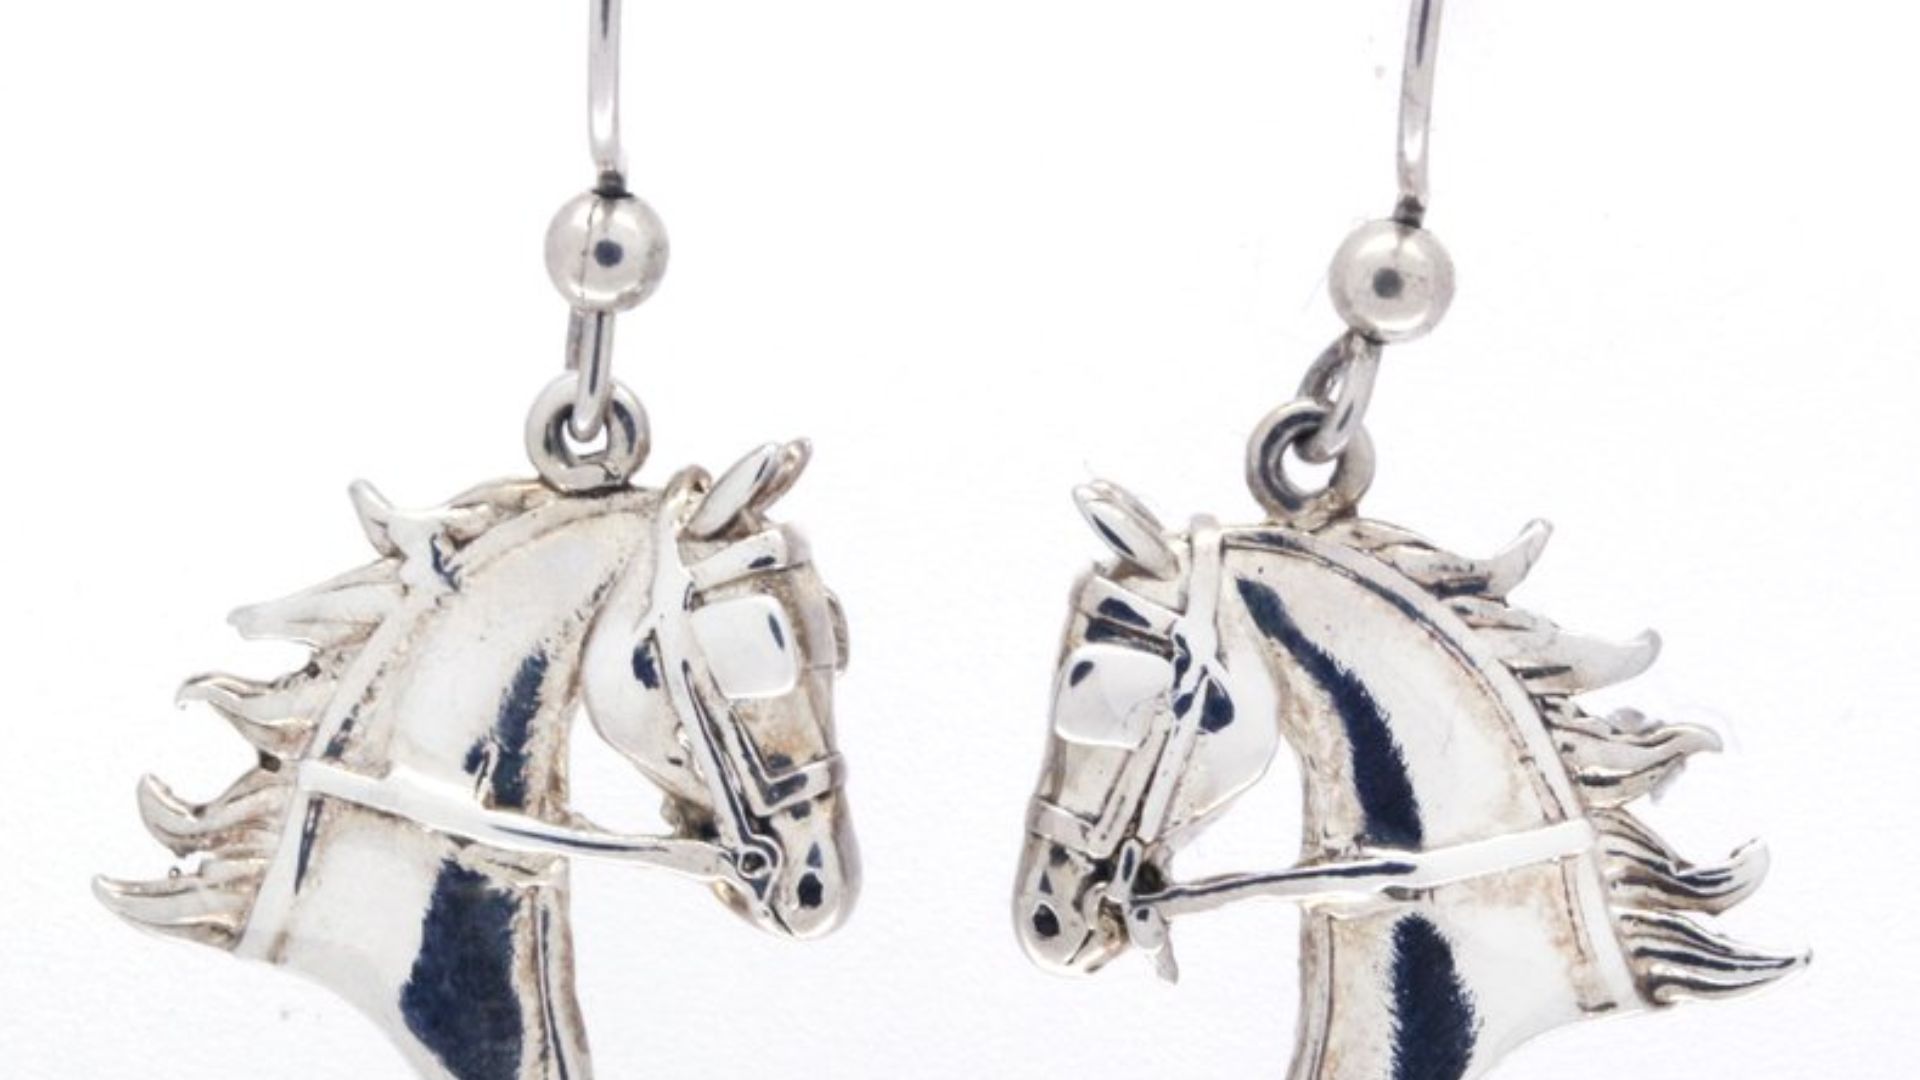 Equestrian Silver Jewelry - Grace And Style In The Saddle